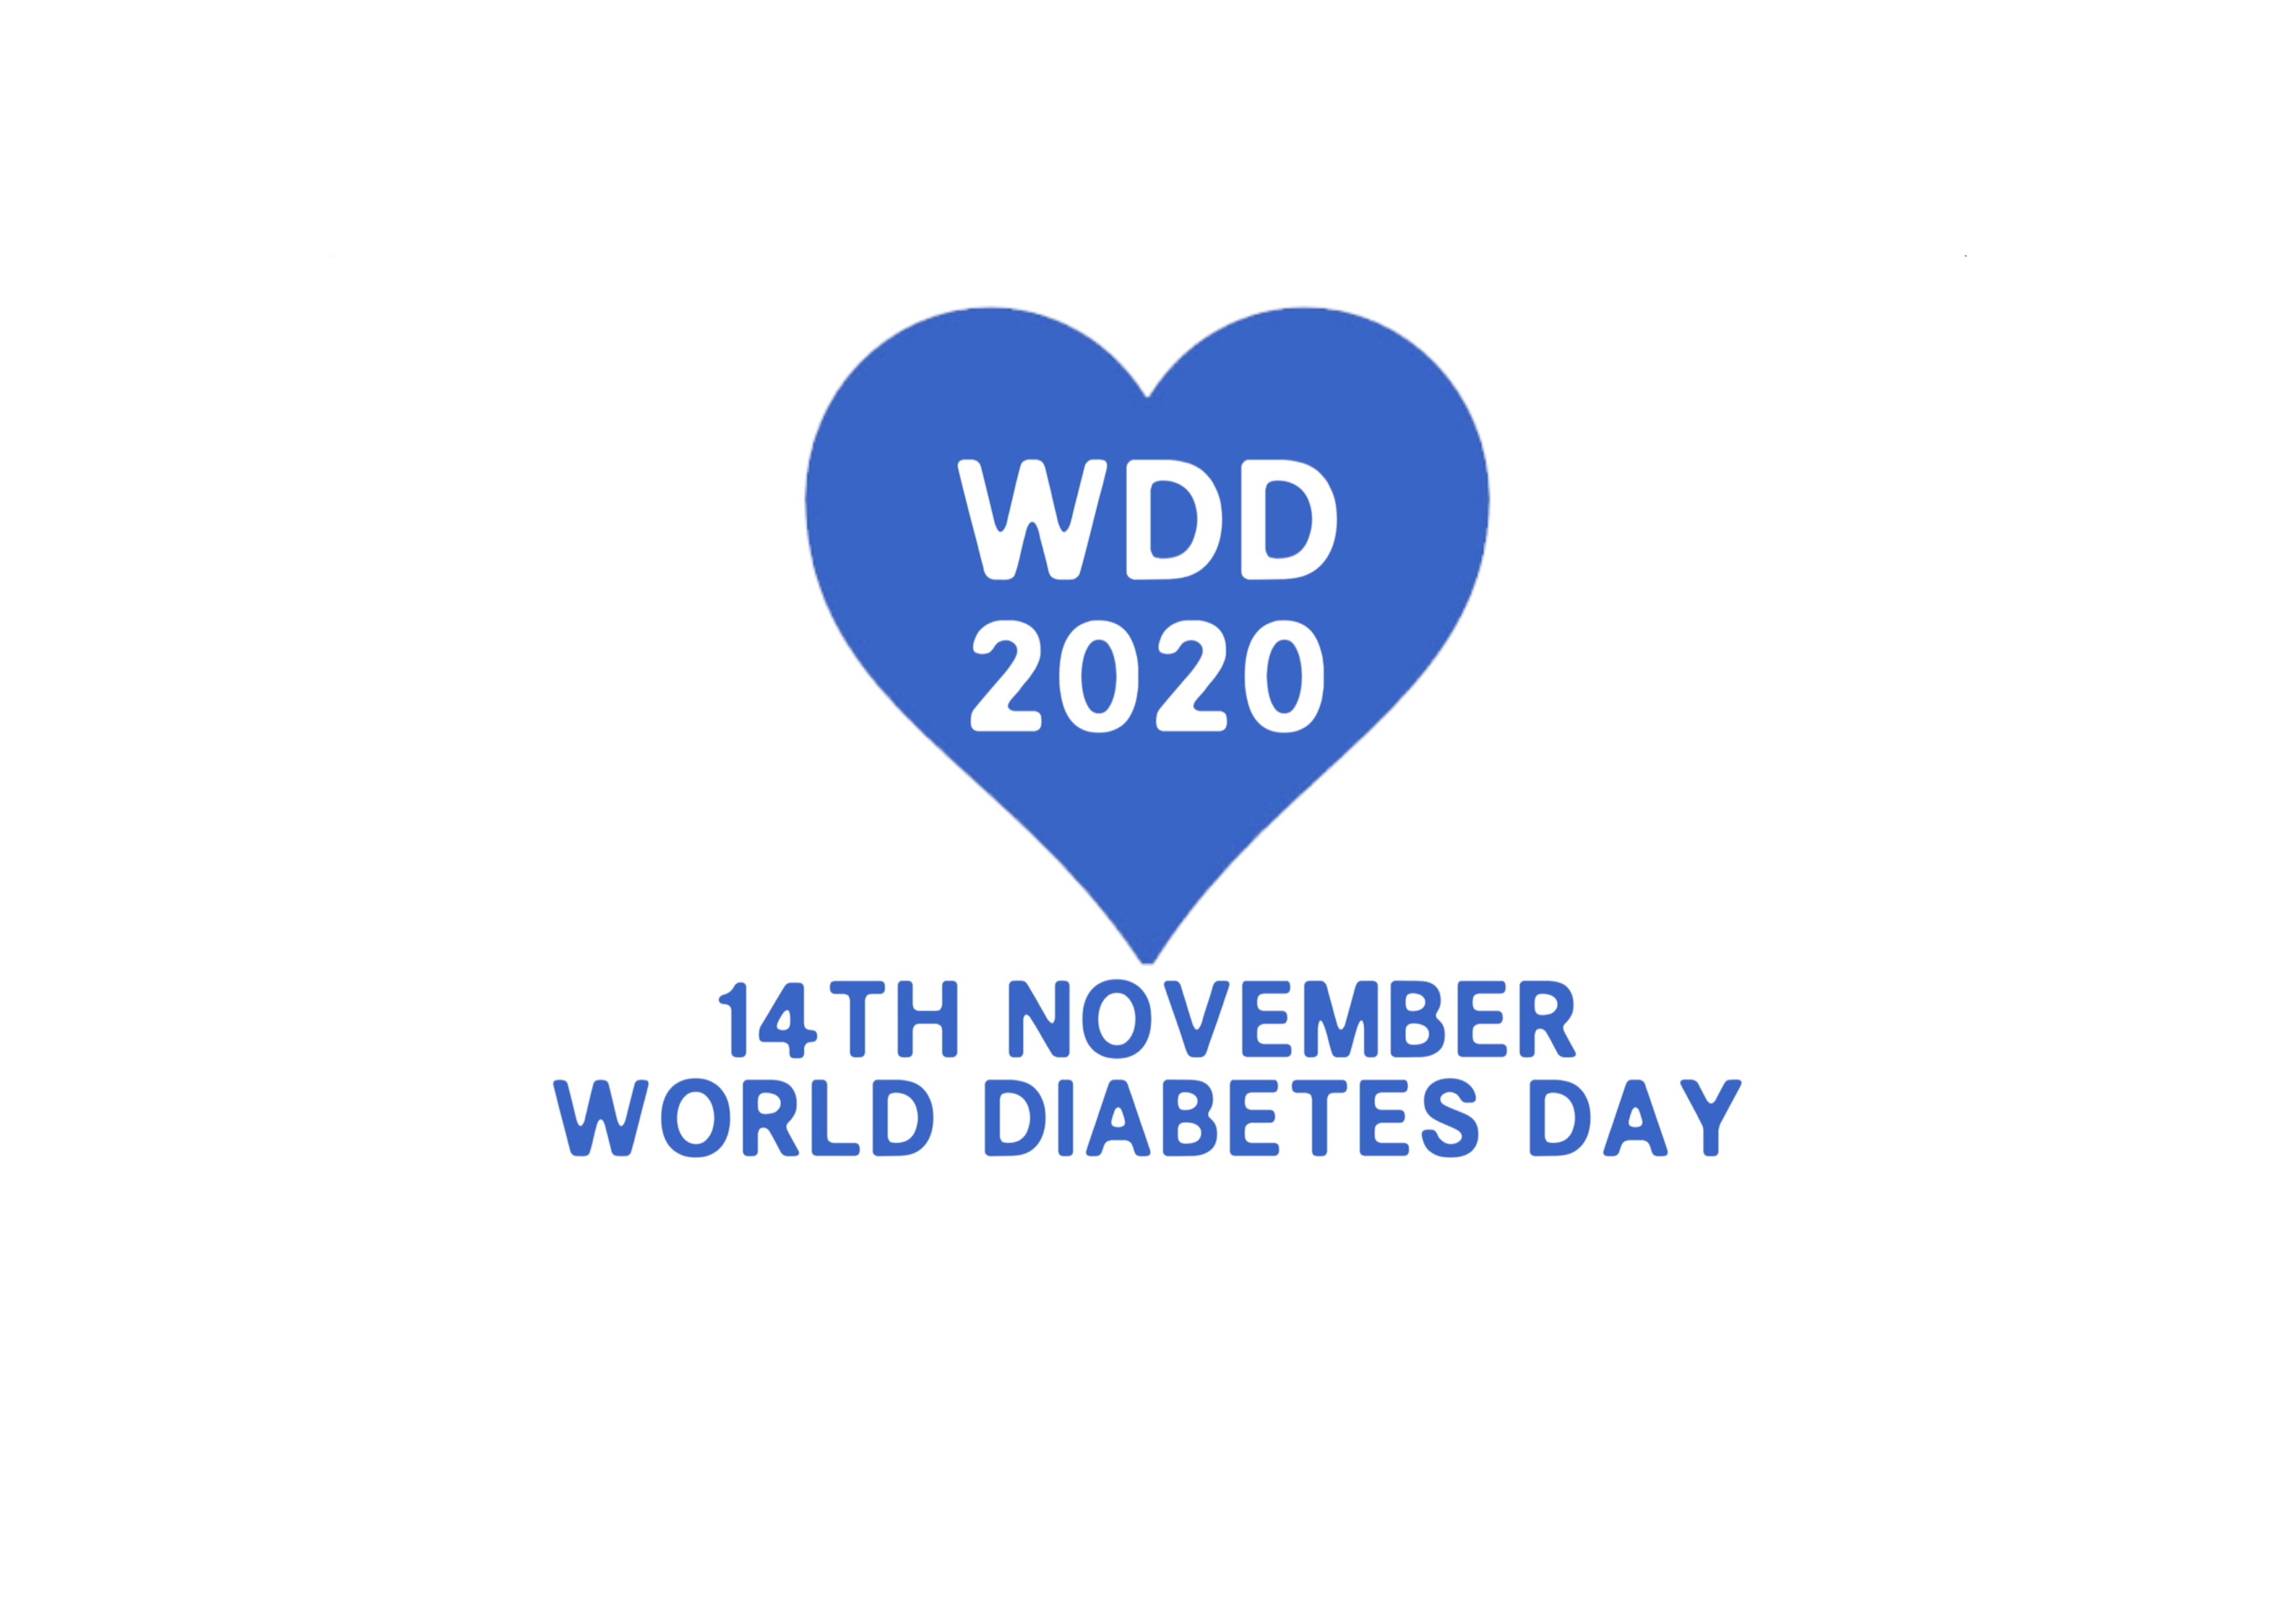 It's World Diabetes Day on the 14th November